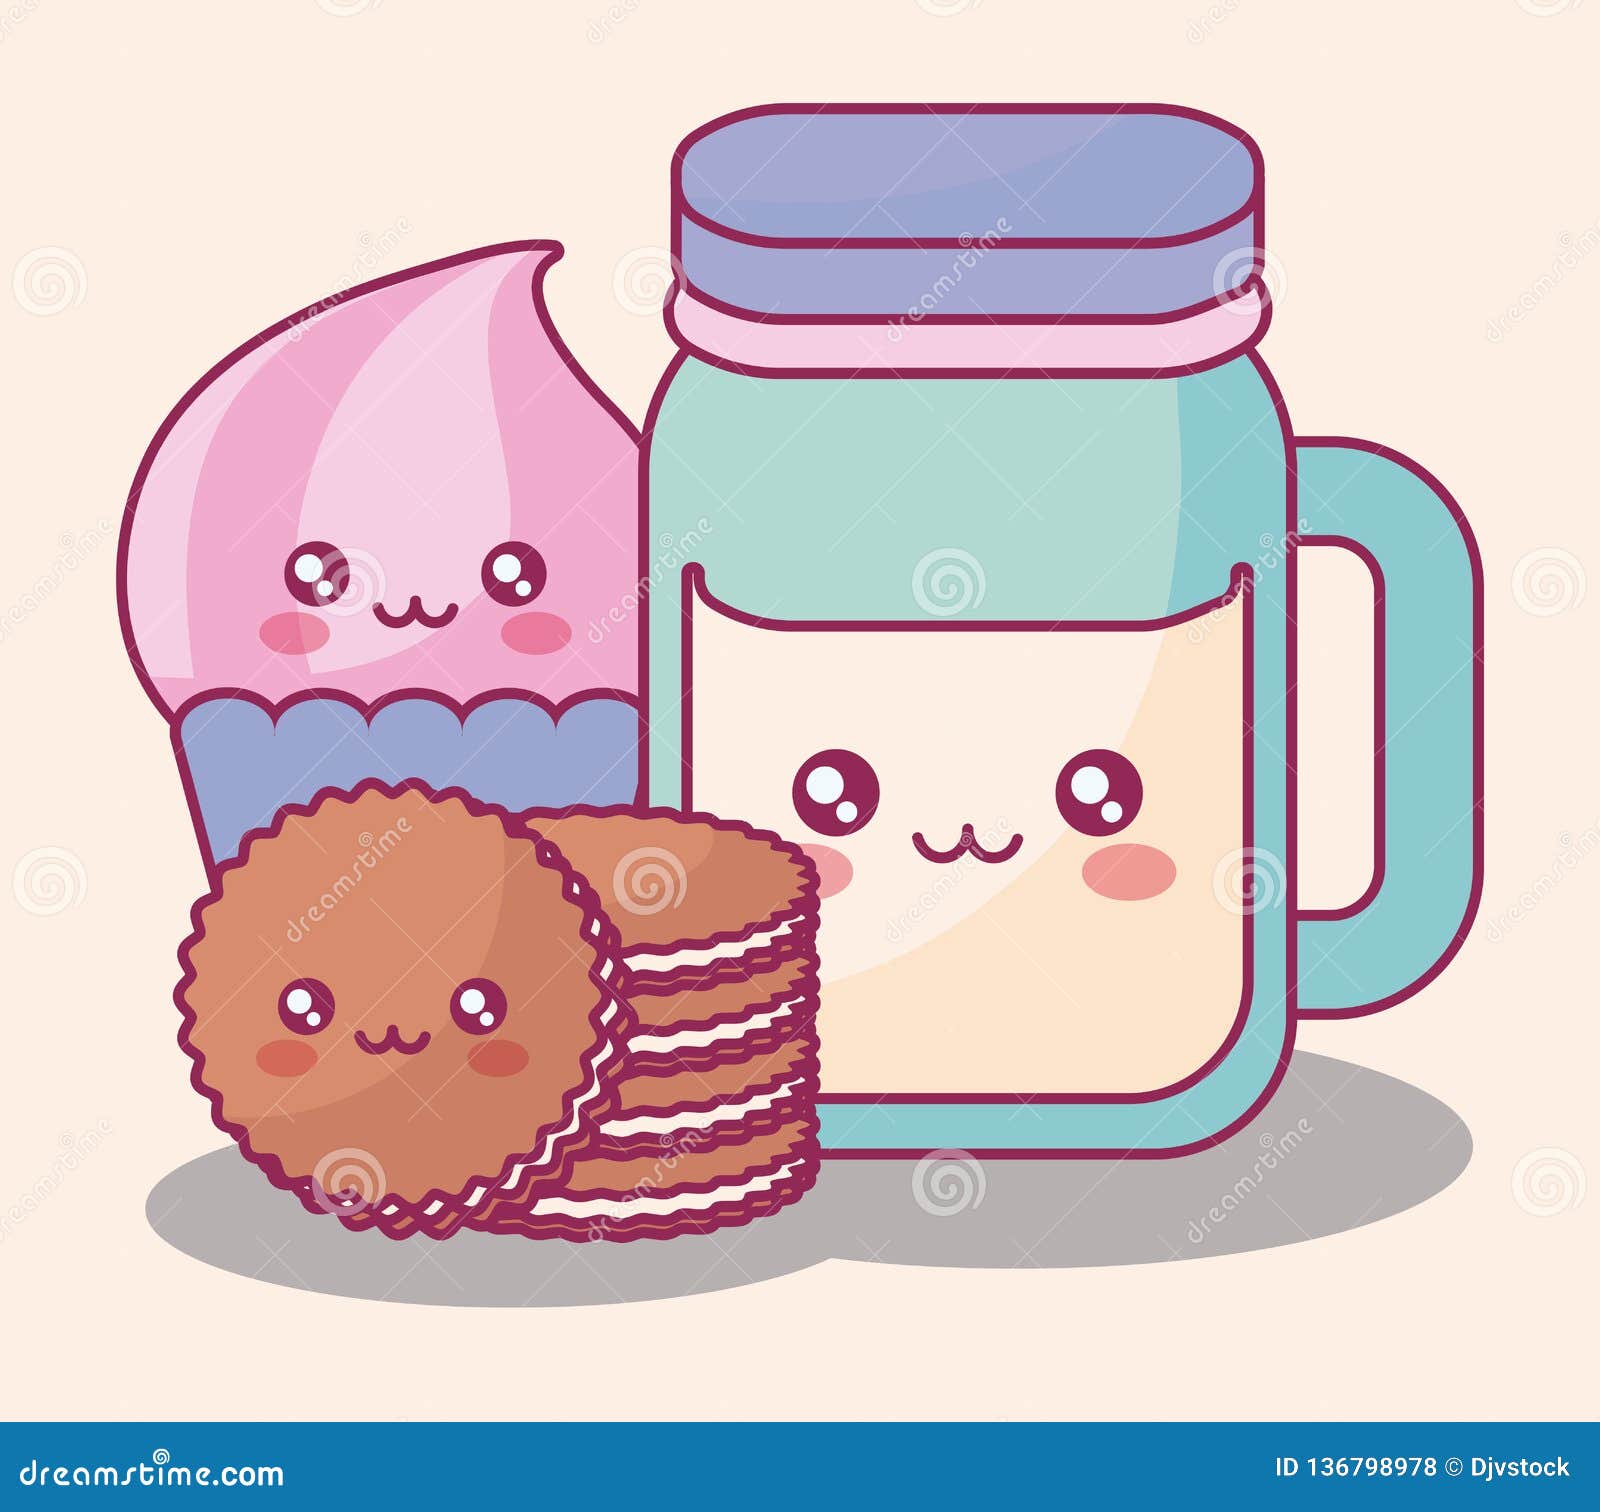 Sweet Products Kawaii Characters Stock Vector Illustration Of Drink Emoticon 136798978